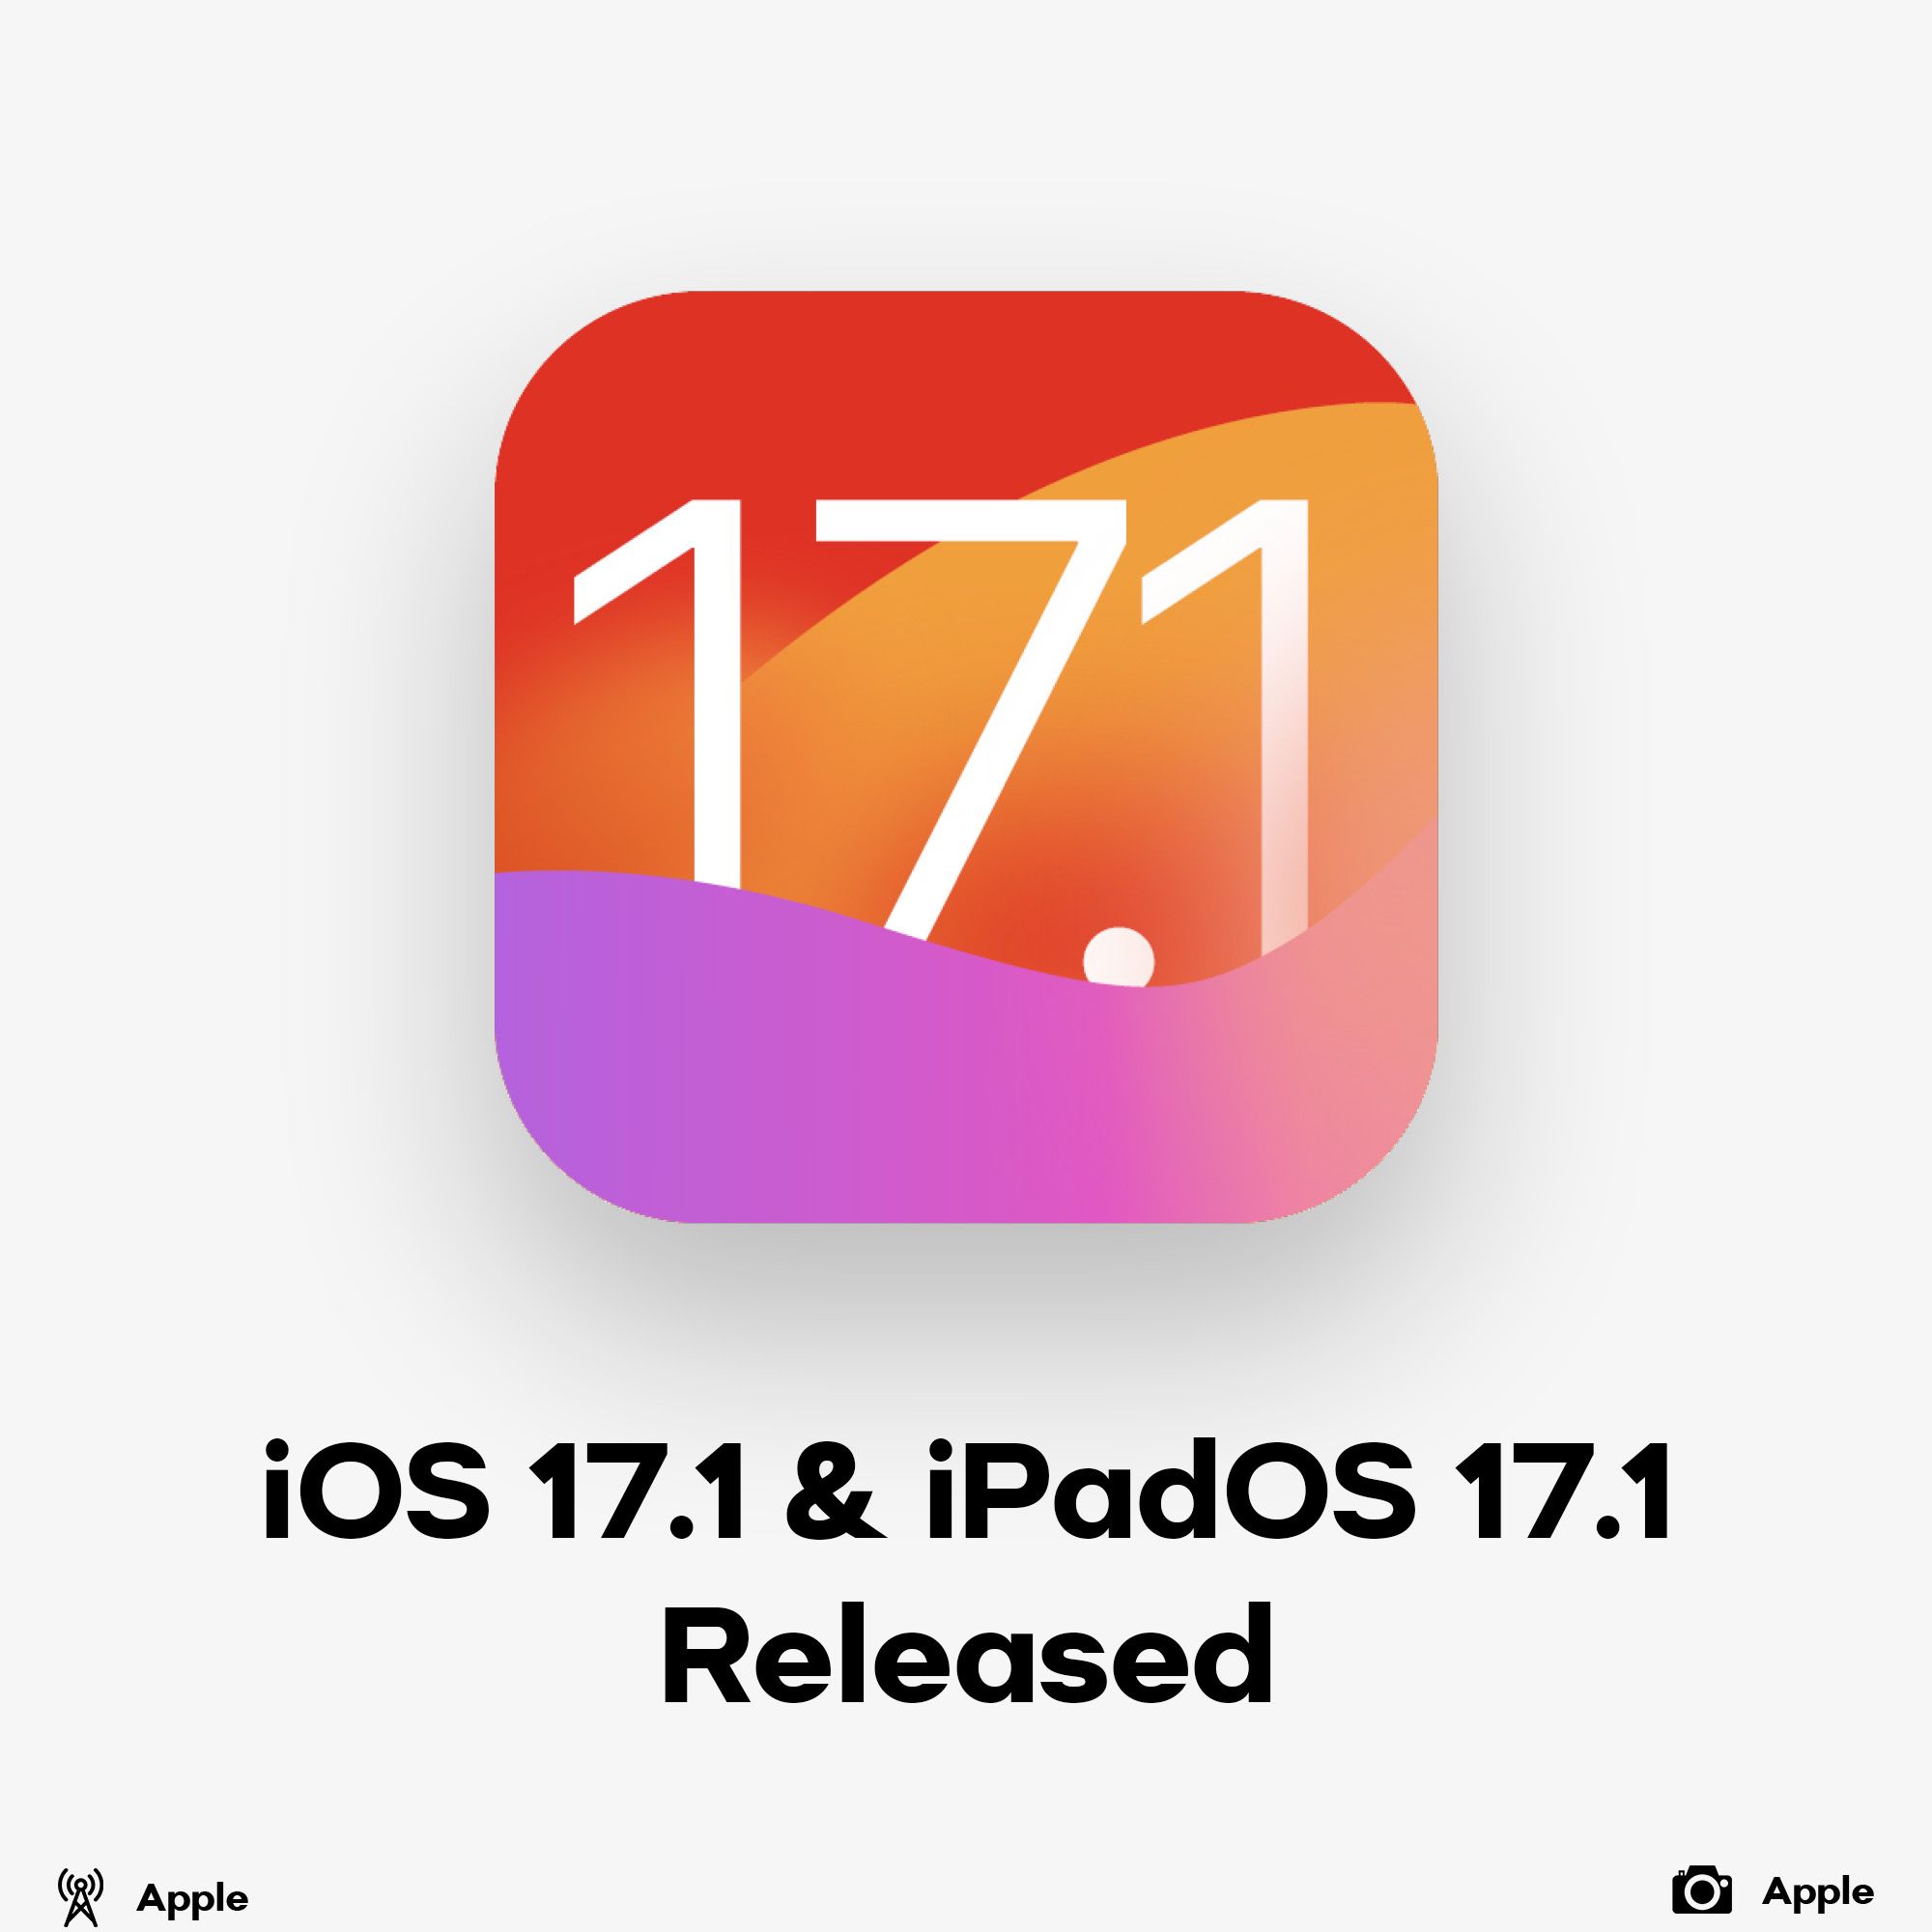 iOS and iPadOS 17.1 released